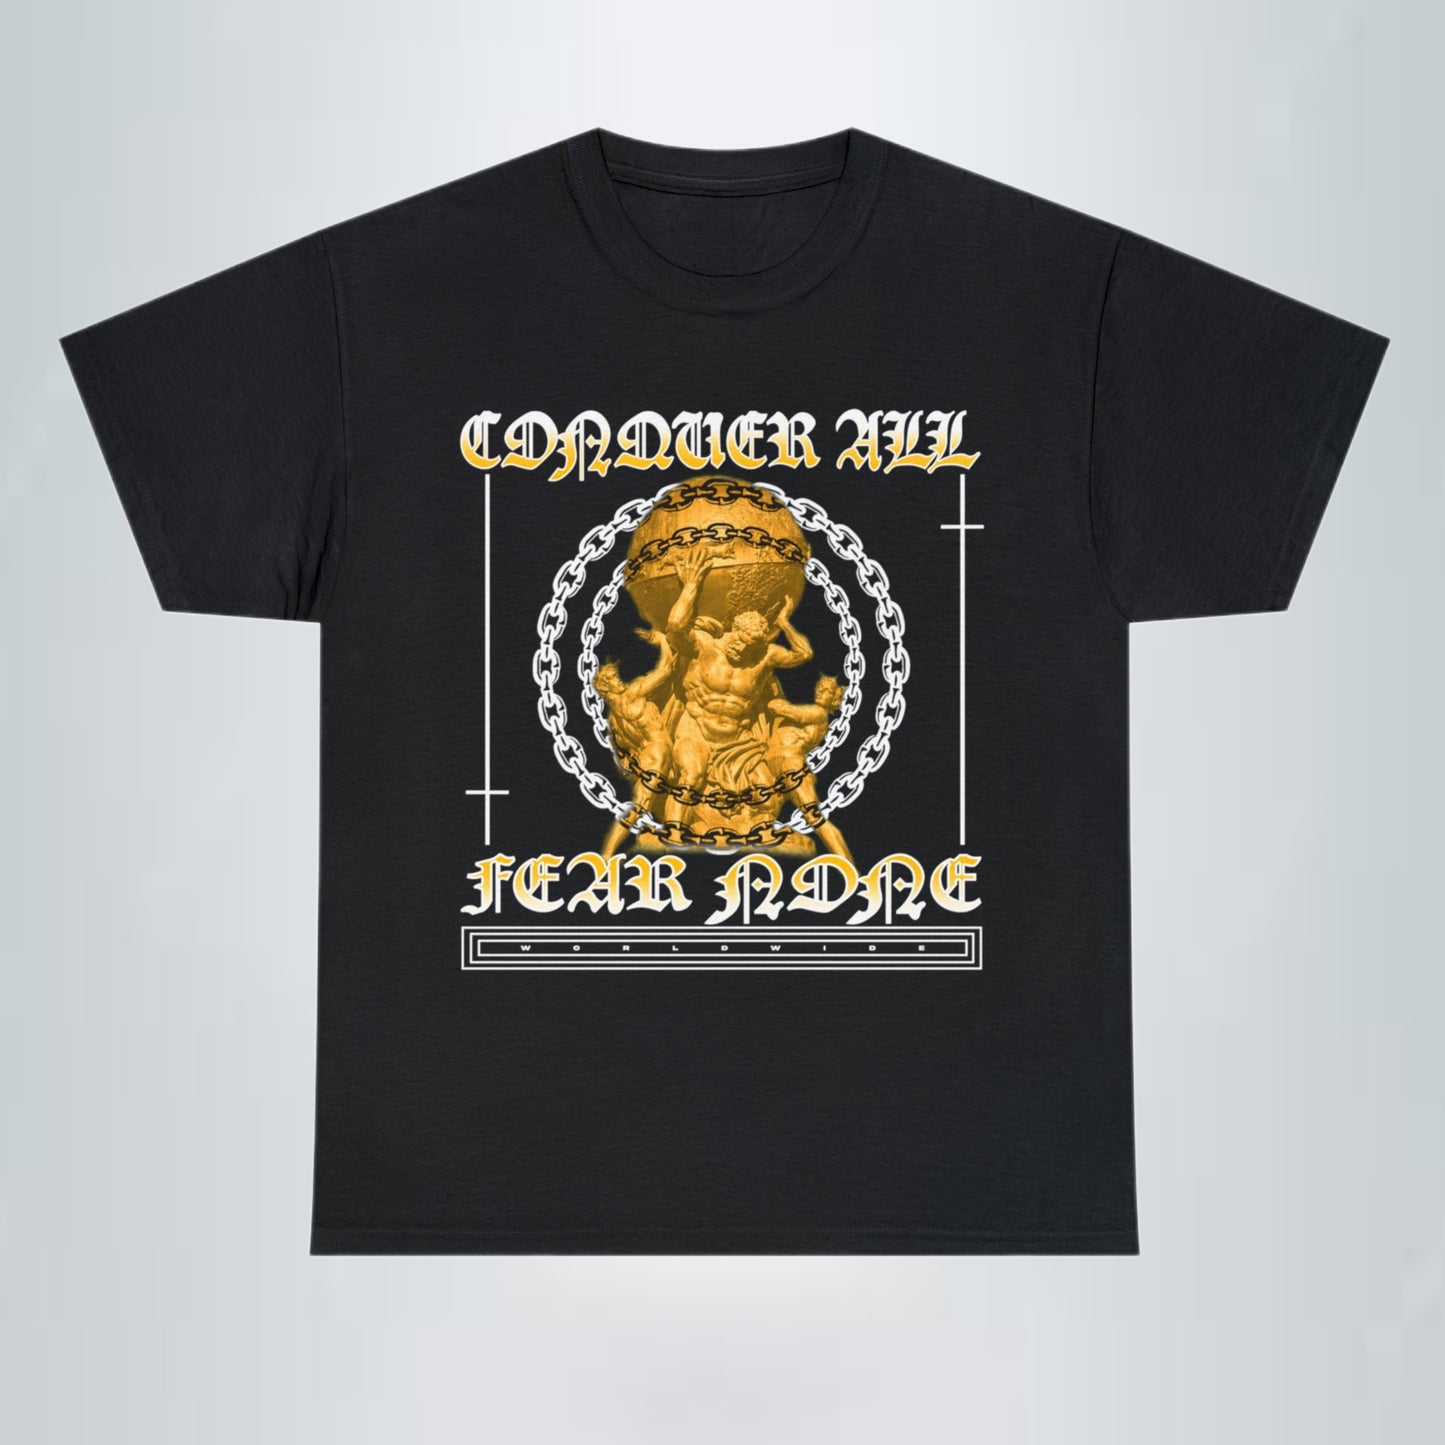 CONQUER ALL FEAR NONE WORLDWIDE TEE